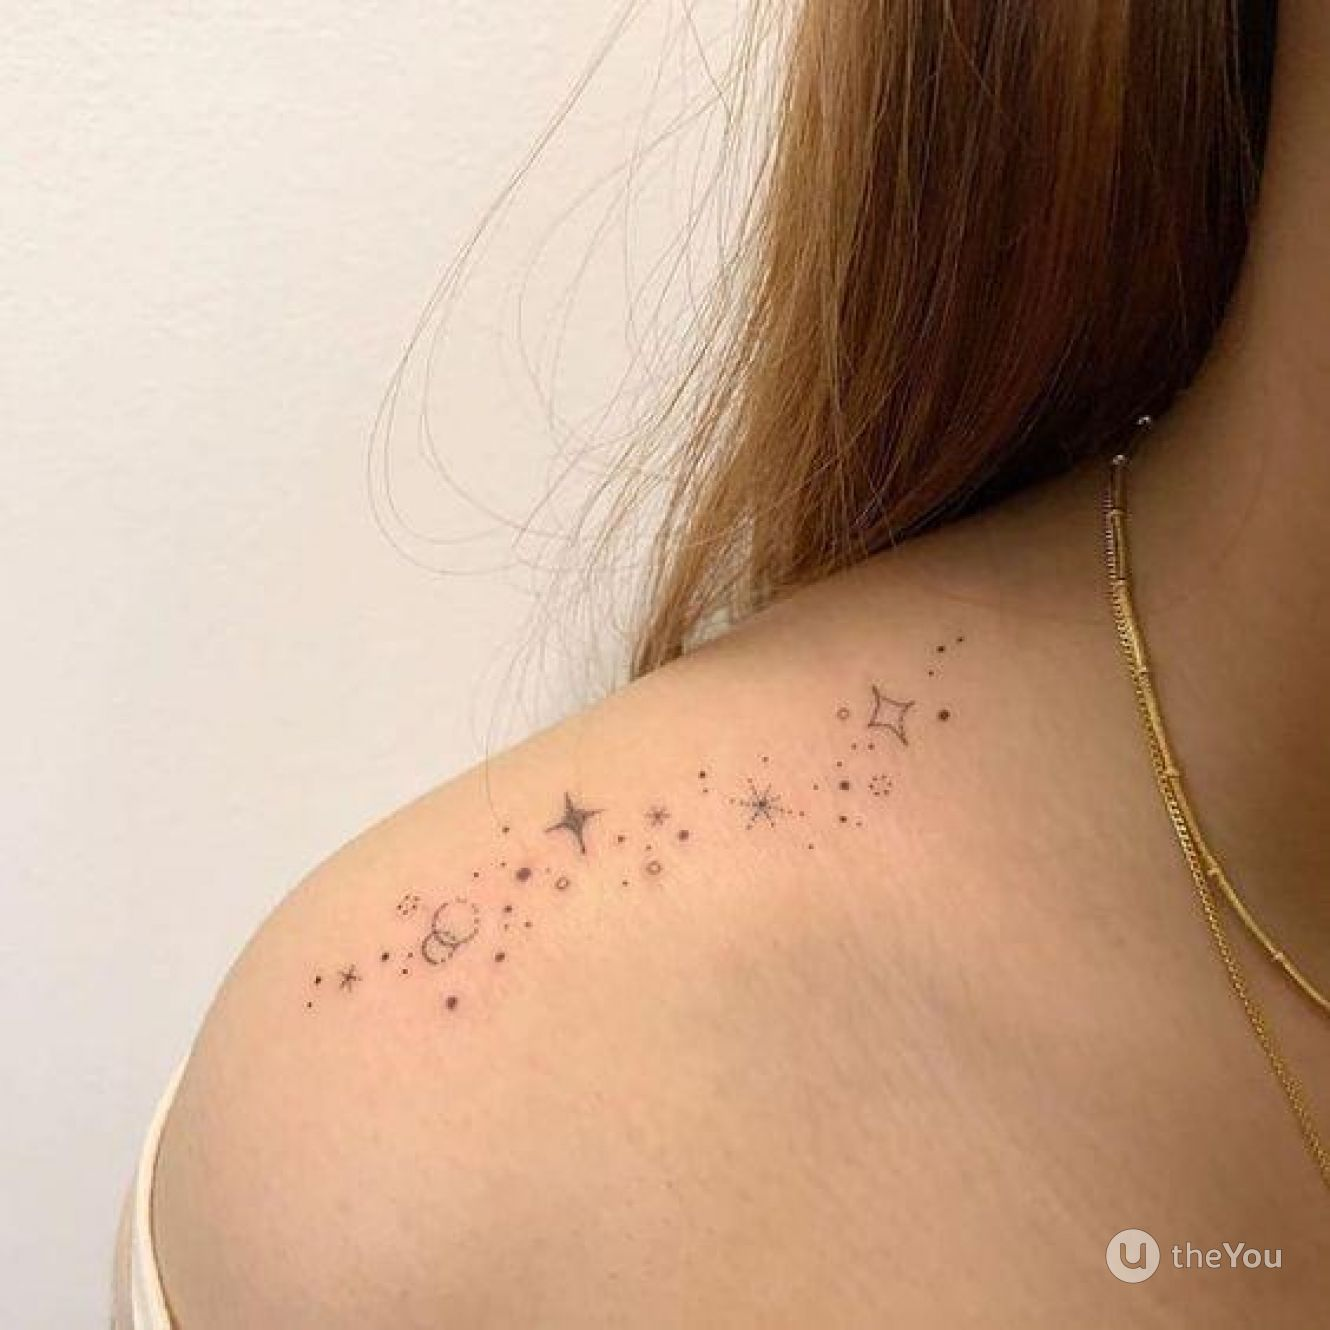 110 Space Tattoos That Are Basically Outer Space Cool | Bored Panda